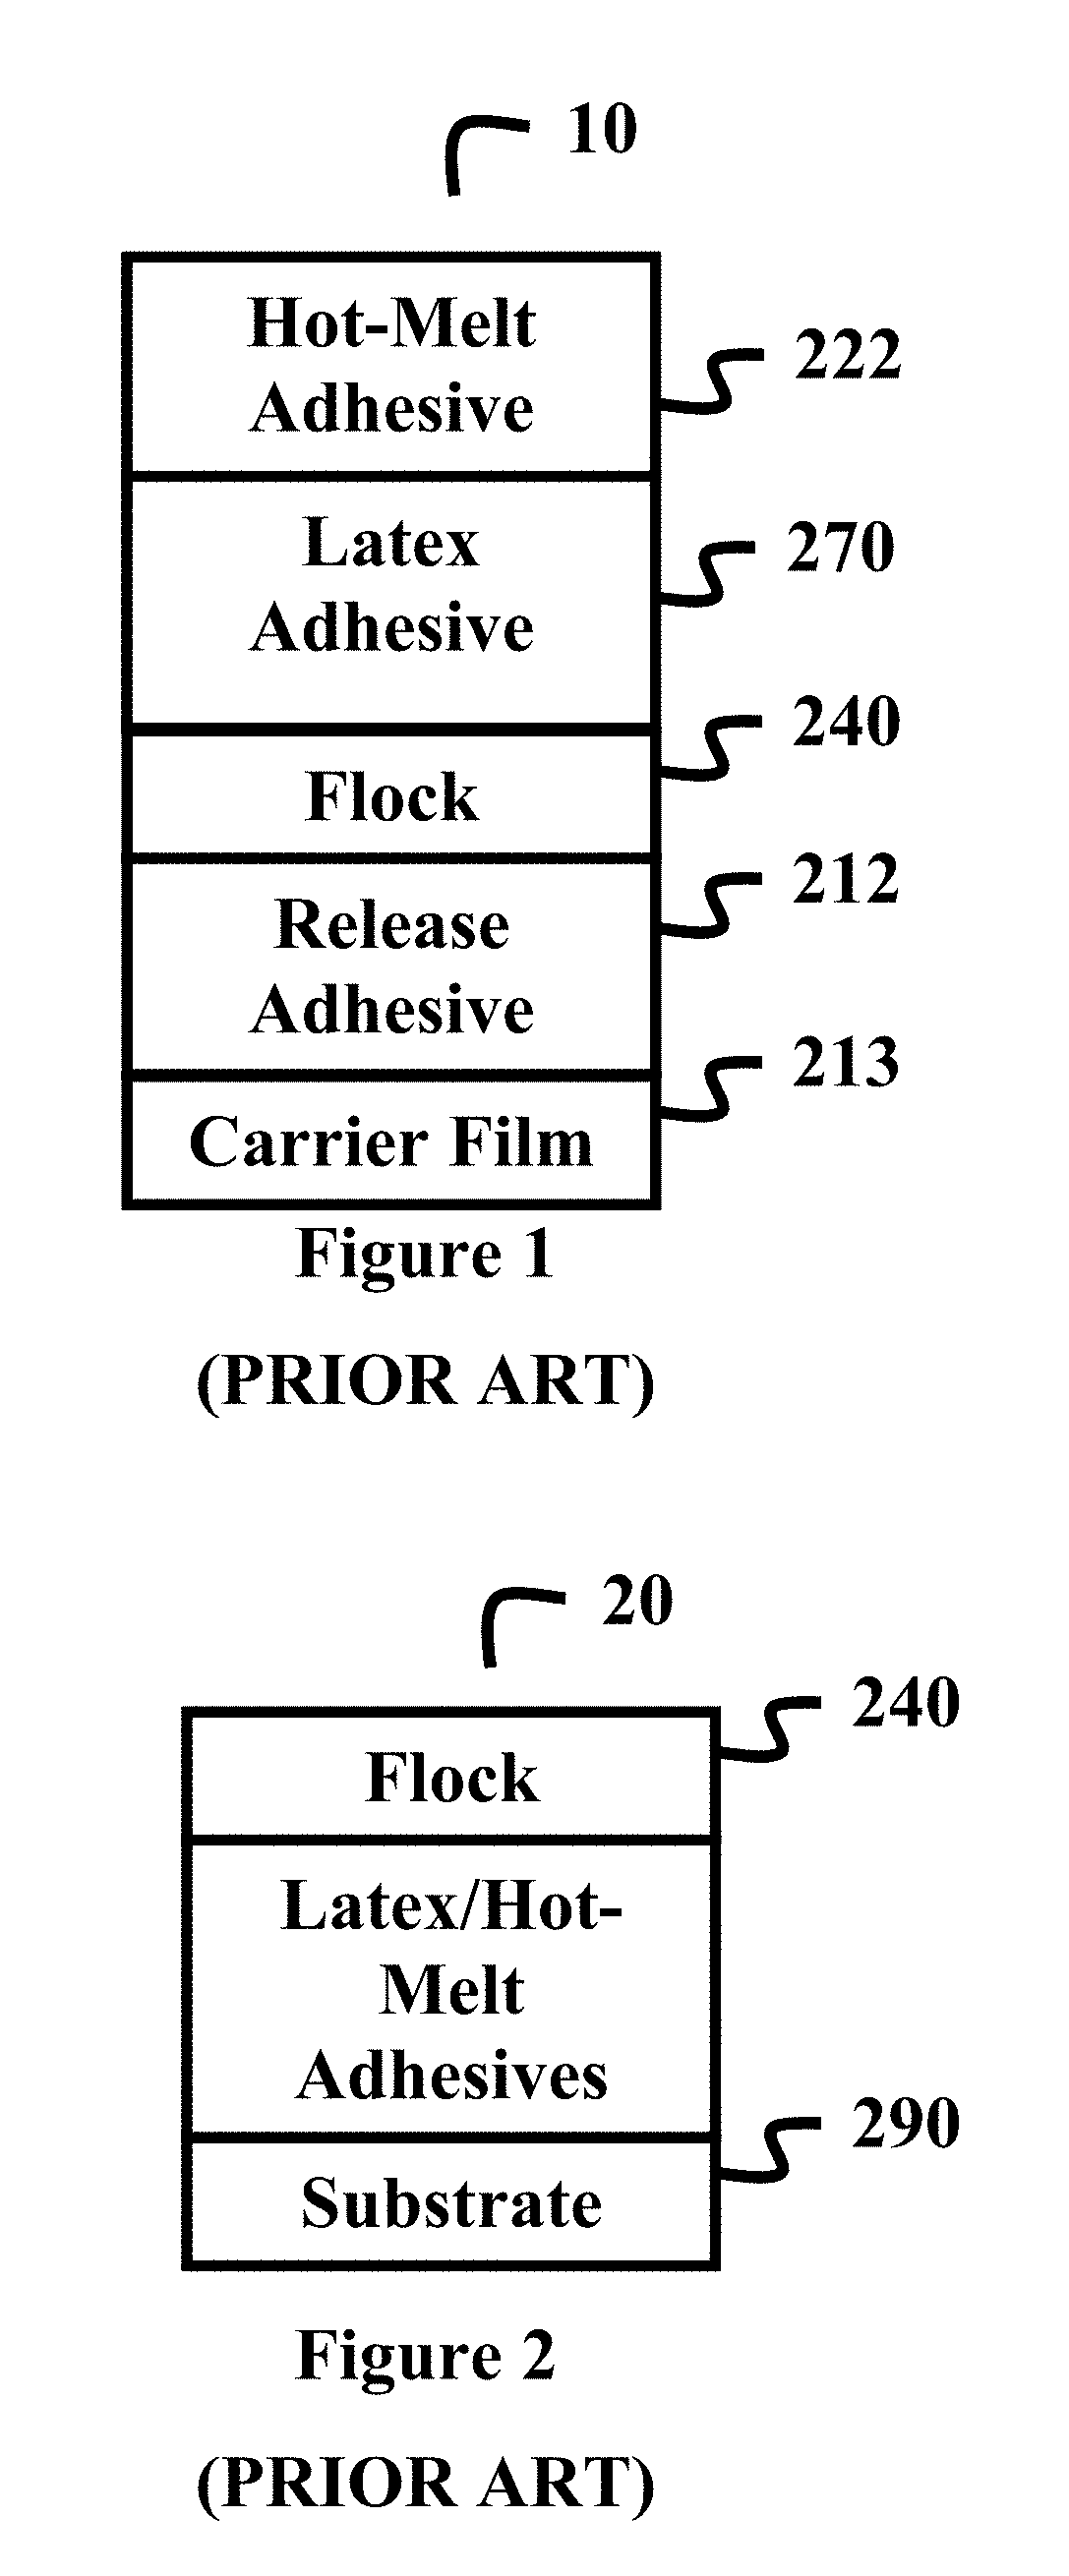 Flocked products having a silicone adhesive composition and methods of making and using the same